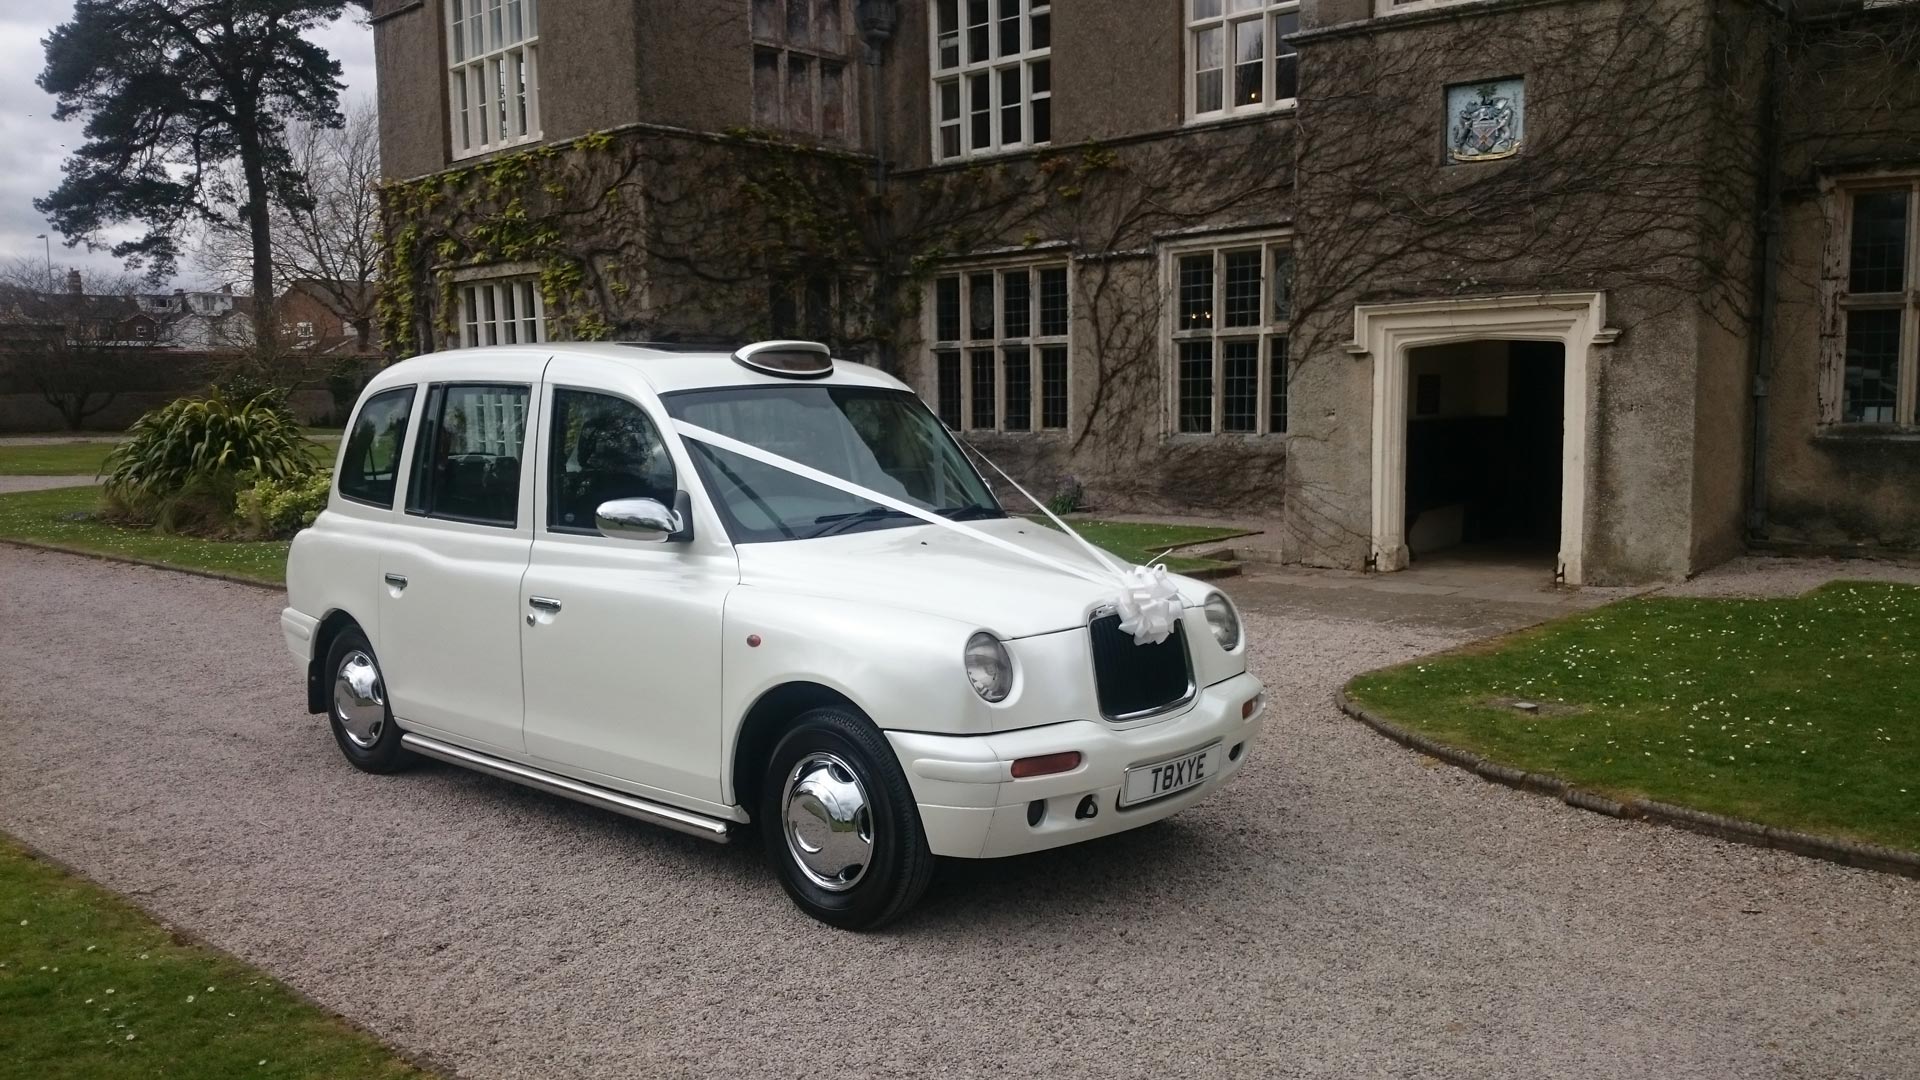 Our white London taxi used for weddings 